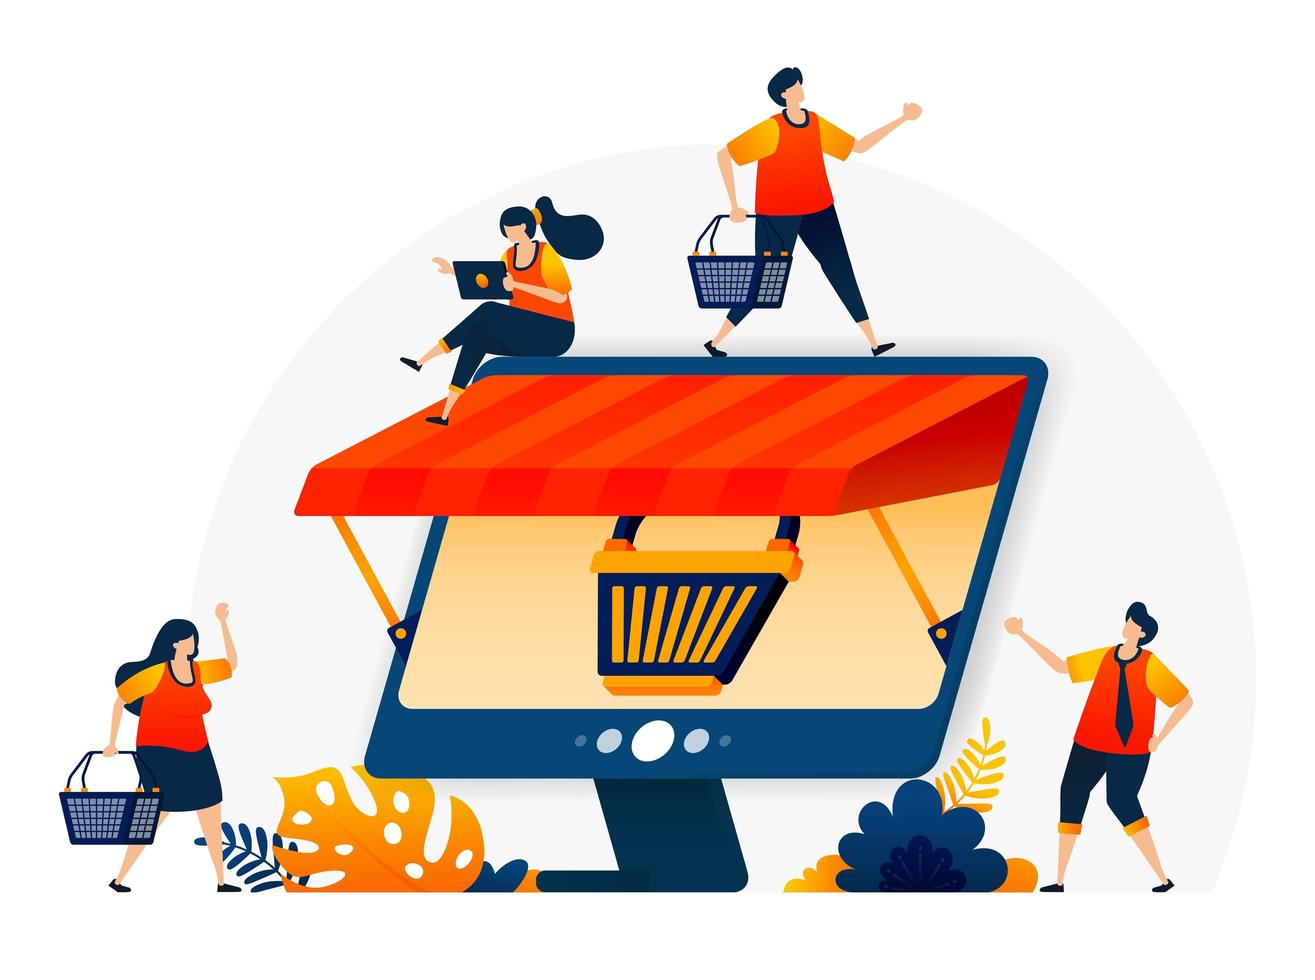 illustration of e-commerce online with a shopping cart metaphor and monitor with a roof. Wholesale and retail online stores. Vector design template for landing page, web, websites, site, banner, flyer